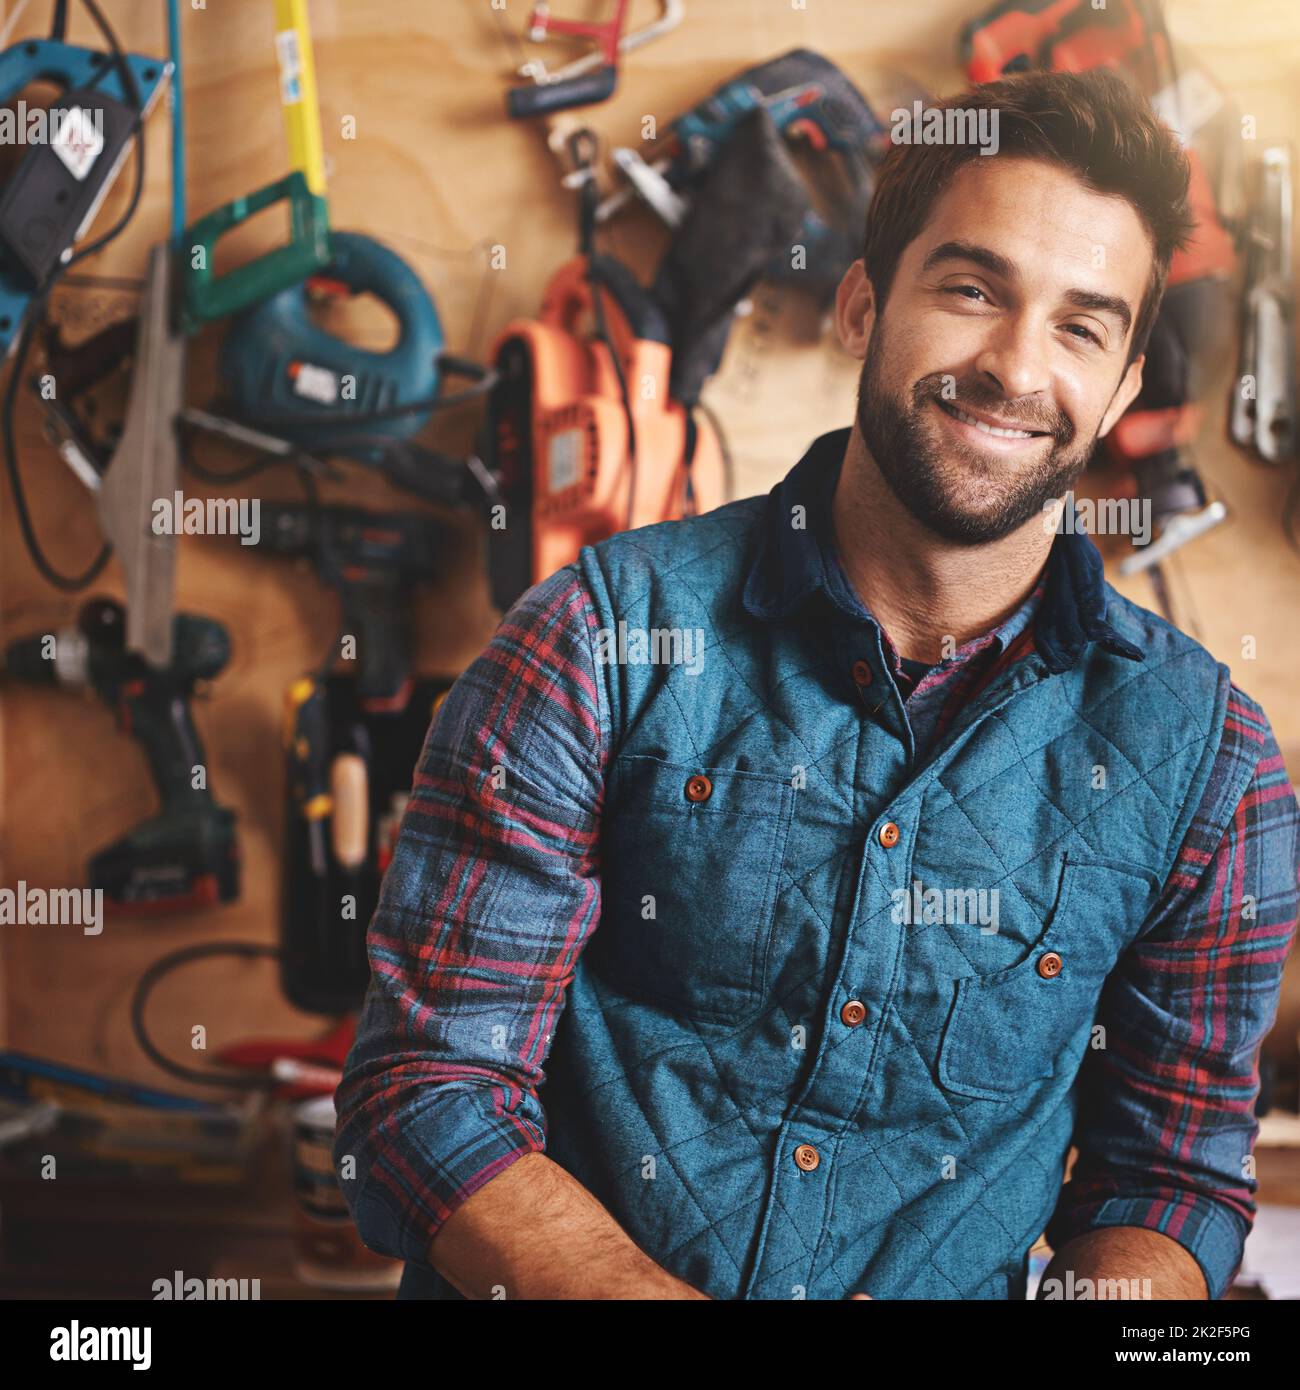 Ive got the tools to get the job done. Portrait of a man standing in his workshop. Stock Photo